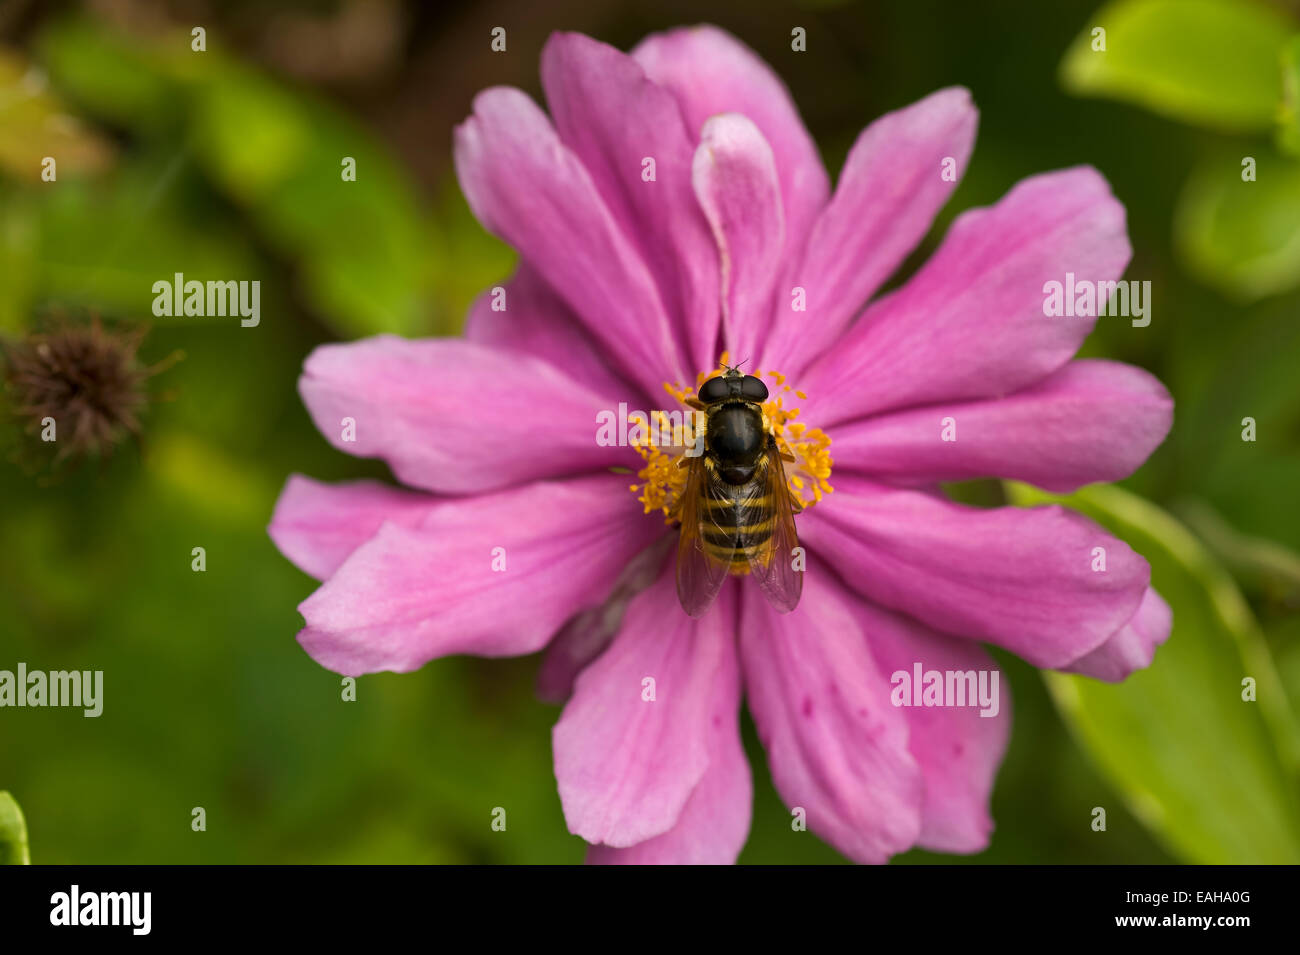 Buff tail bee collecting pollen from pink Japanese Anemone flower head Stock Photo